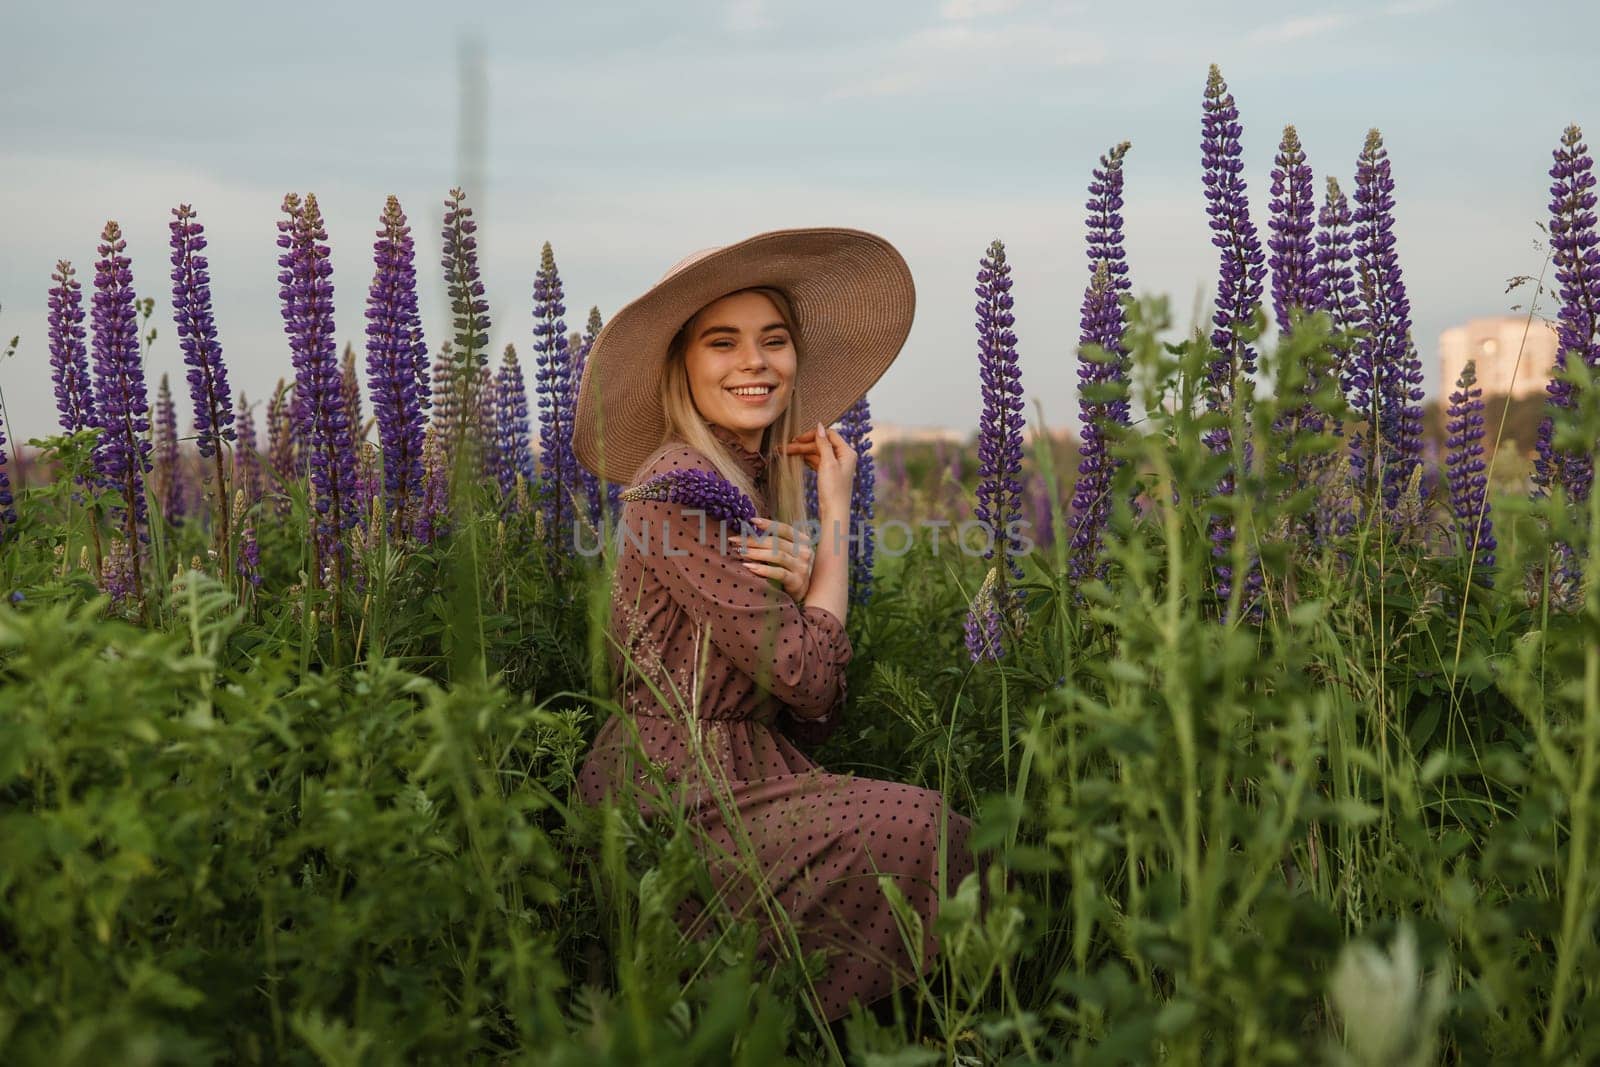 A beautiful woman in a straw hat walks in a field with purple flowers. A walk in nature in the lupin field by Annu1tochka